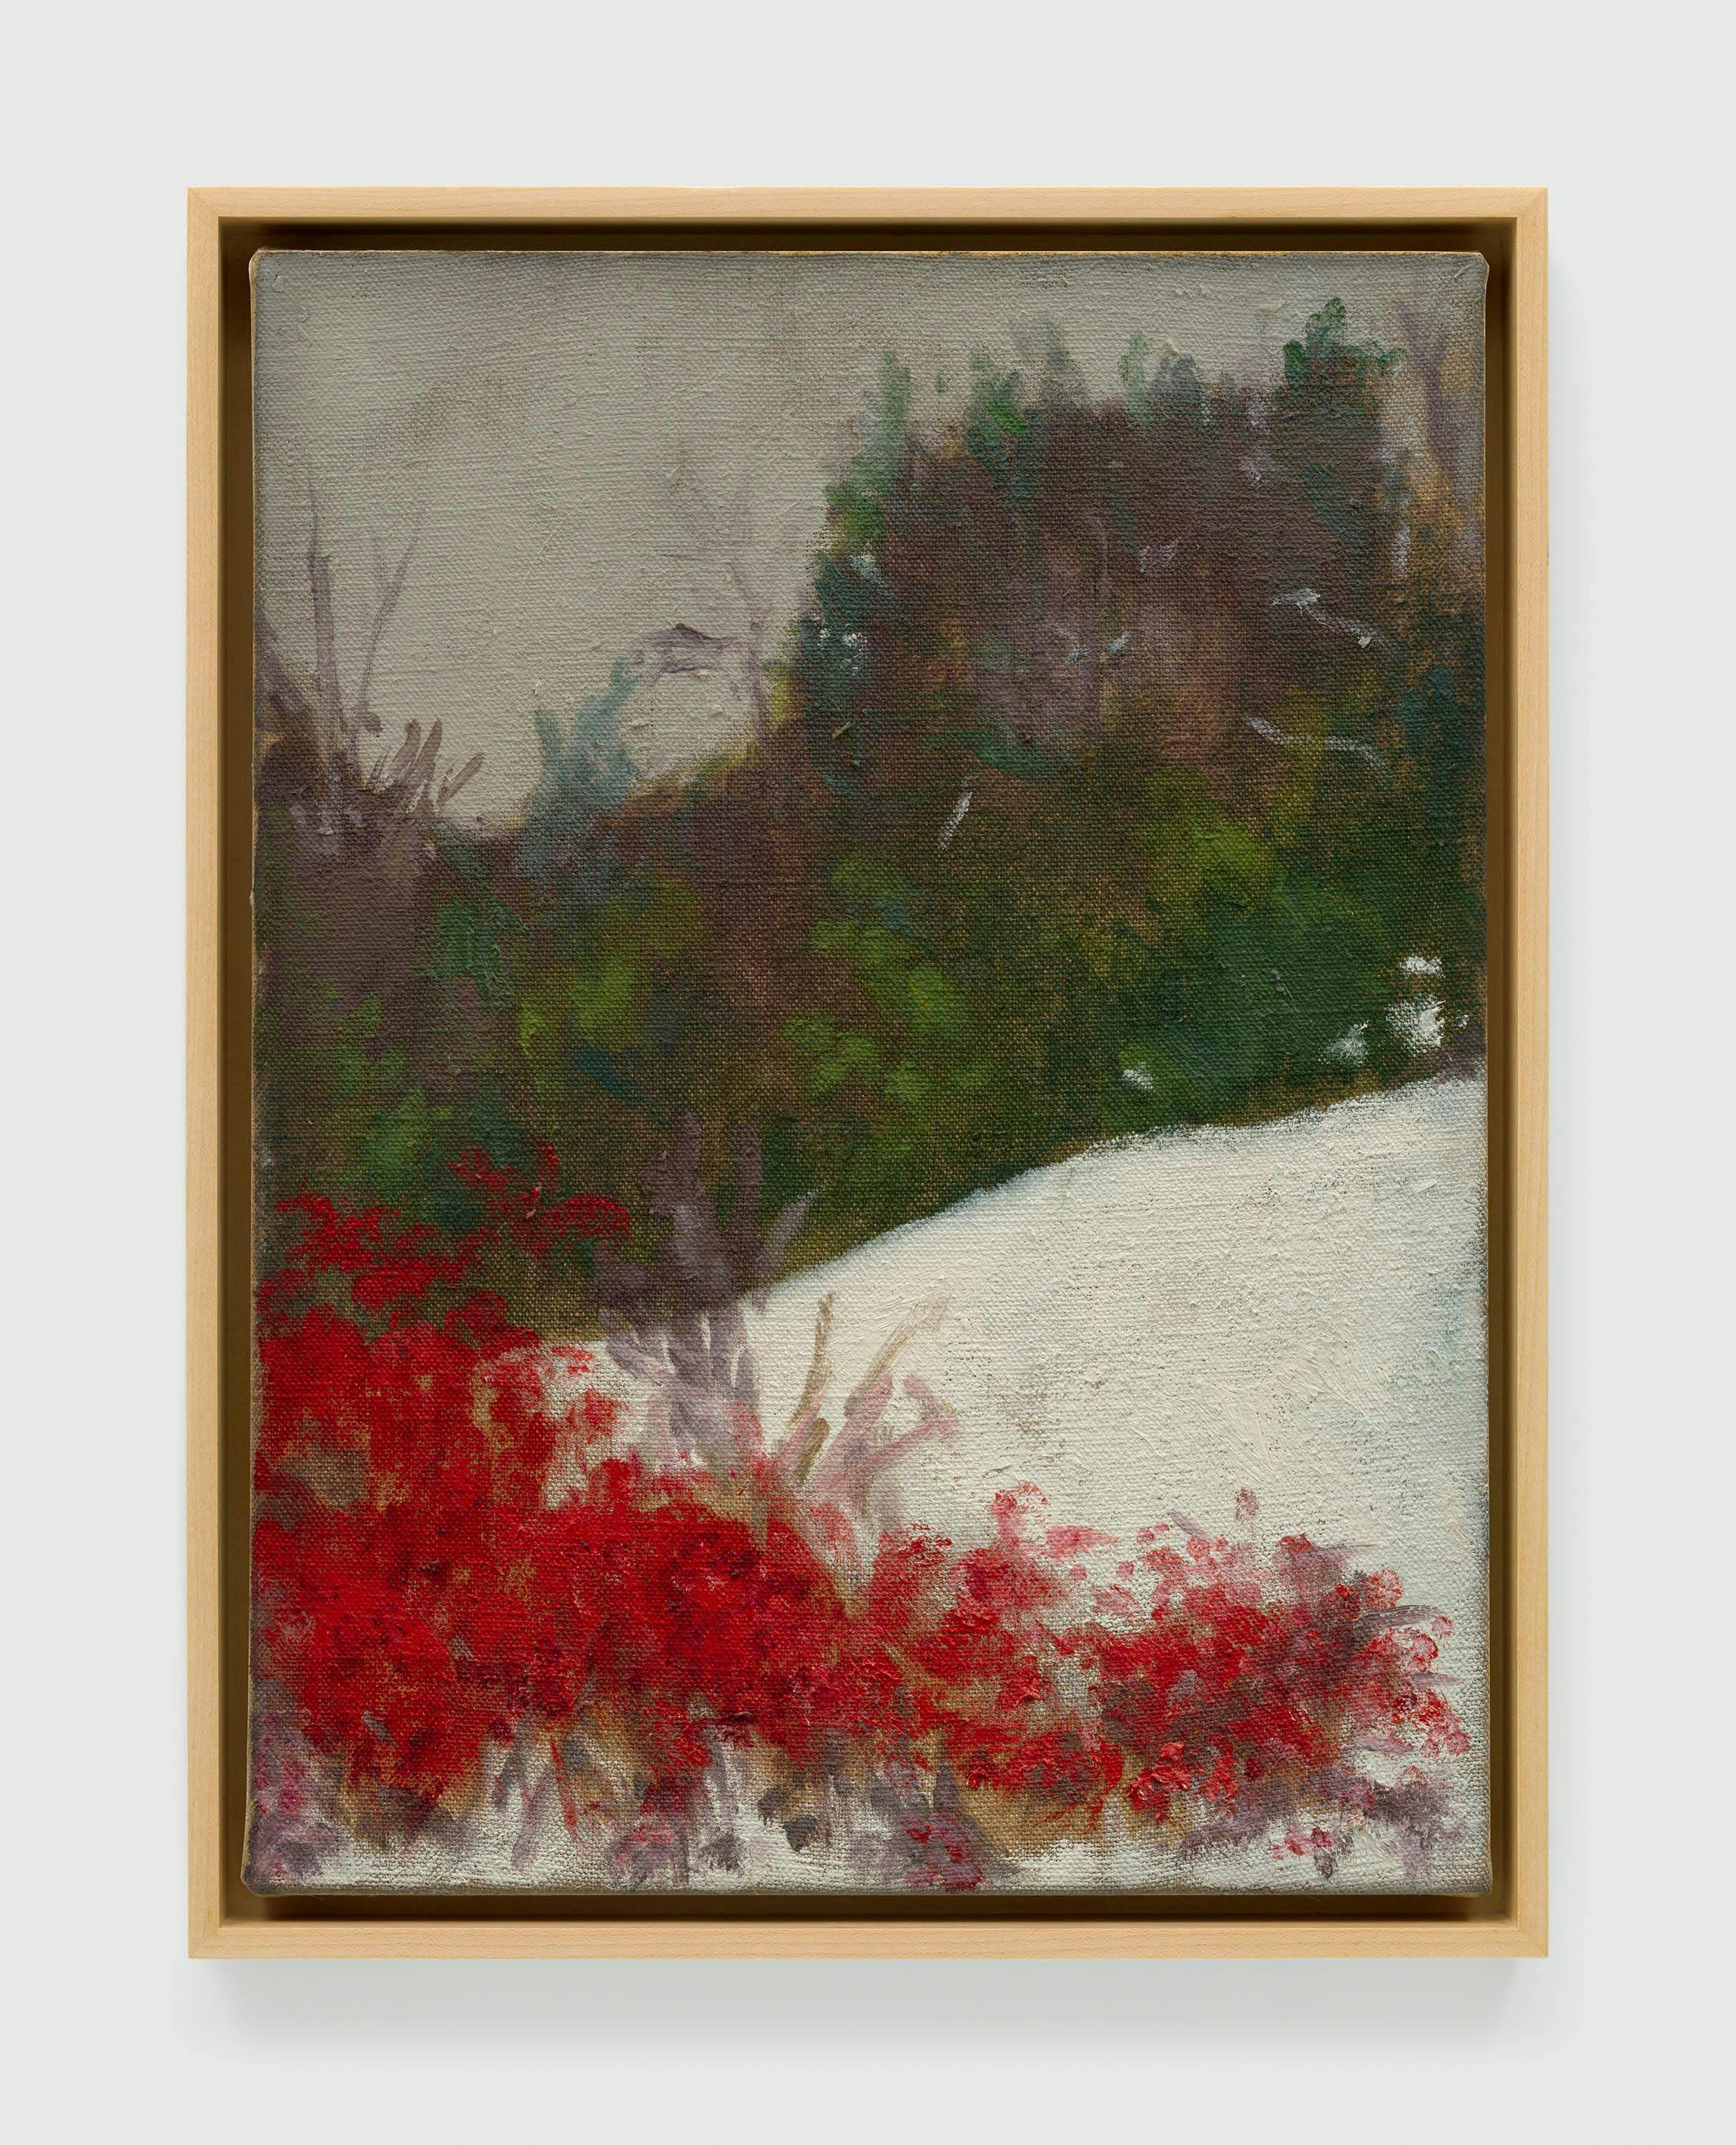 A painting by Merrill Wagner, called Untitled (#13), dated 2007.